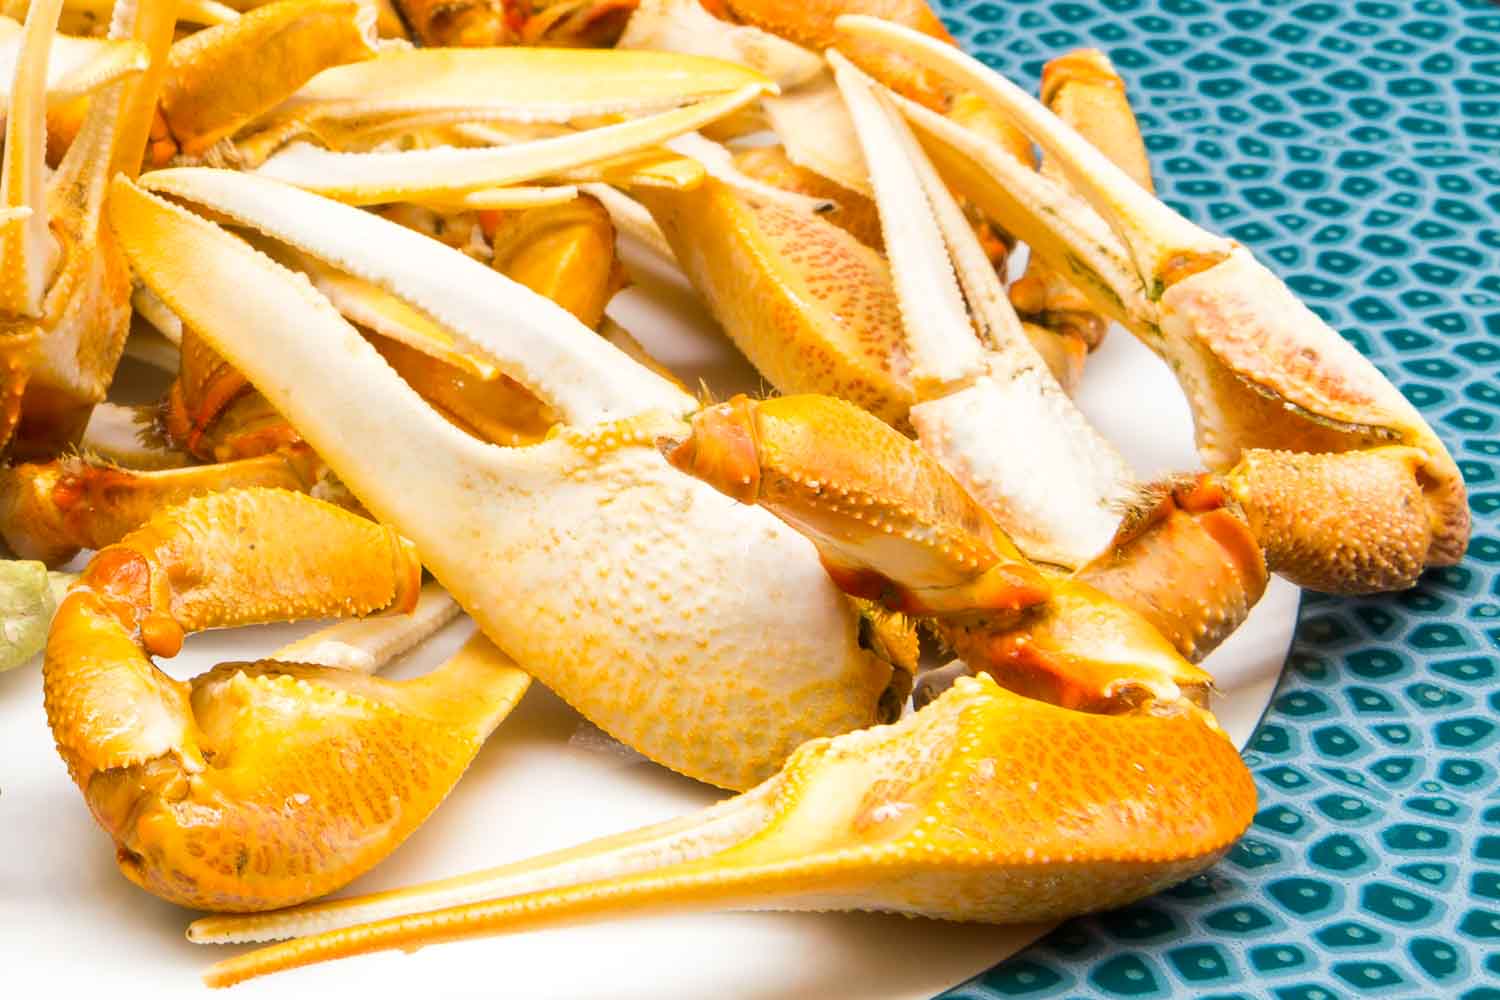 Crab claws (Price / kg)